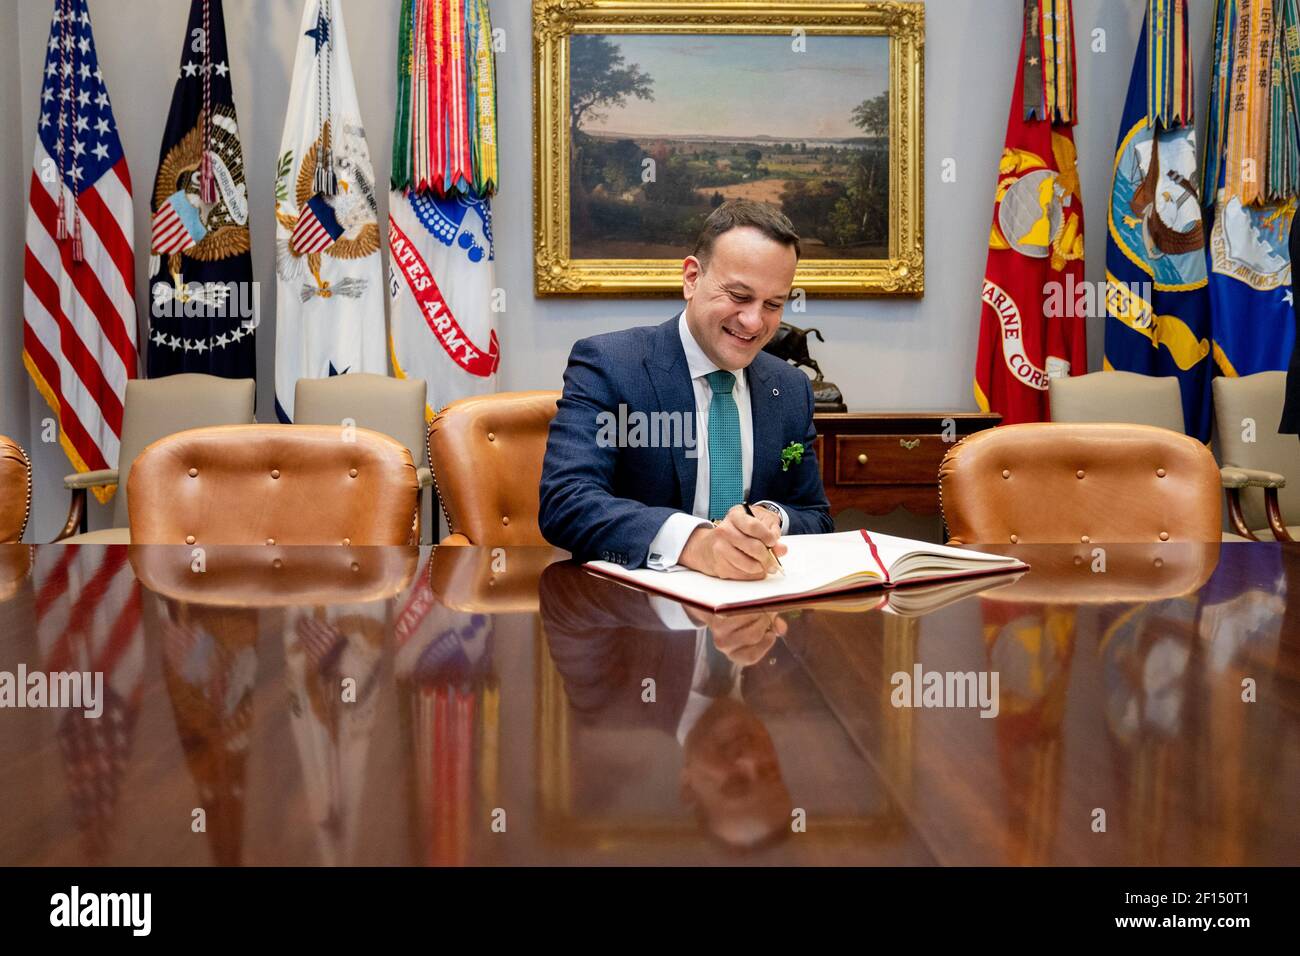 President Donald Trump welcomes the Prime Minister of the Republic of Ireland Leo Varadkar Thursday March 14 2019 to the White House. Stock Photo